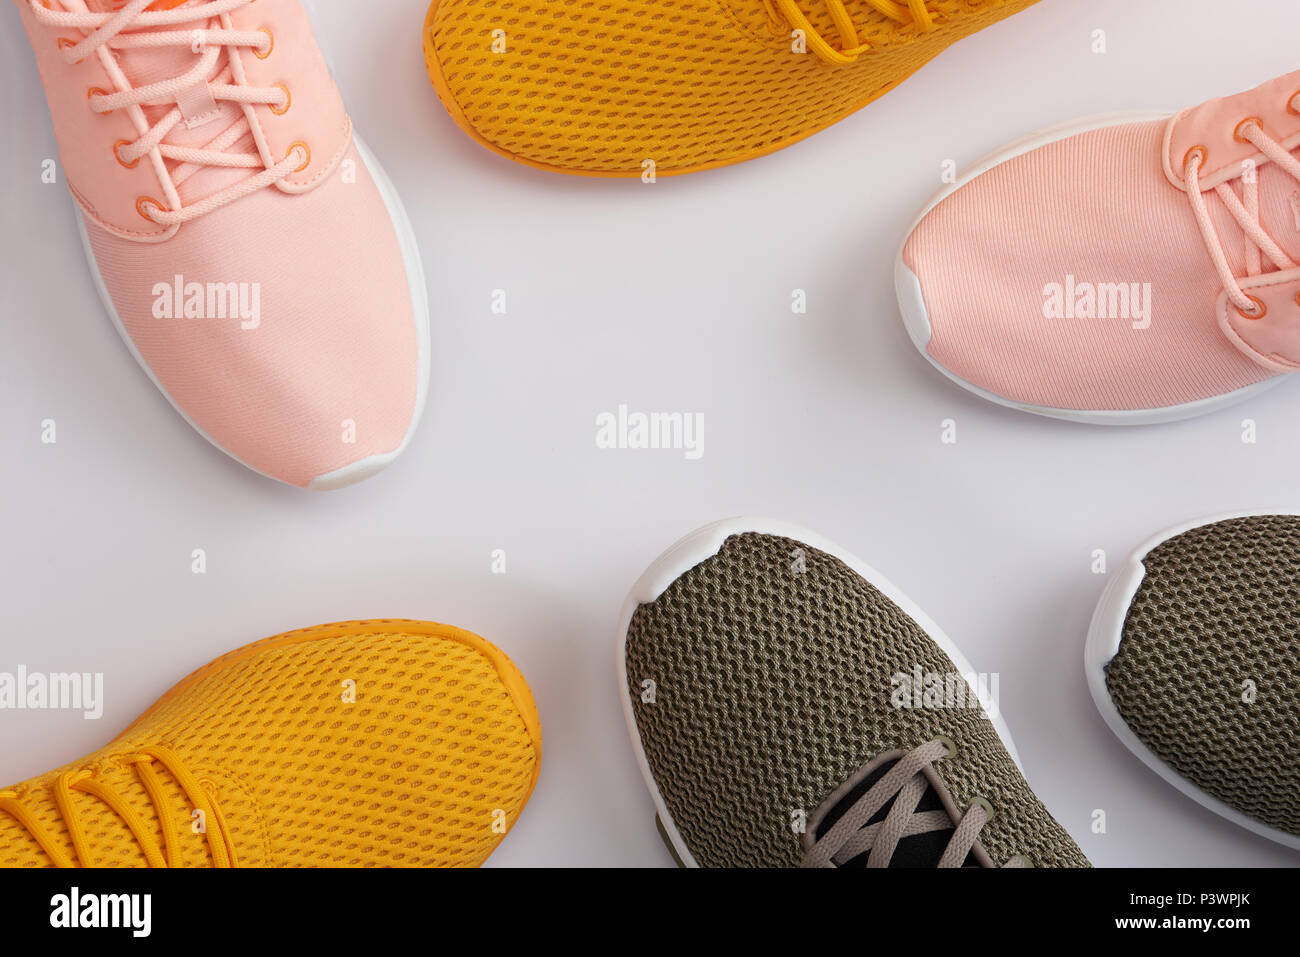 Pattern from colorful sport shoes on white background Stock Photo